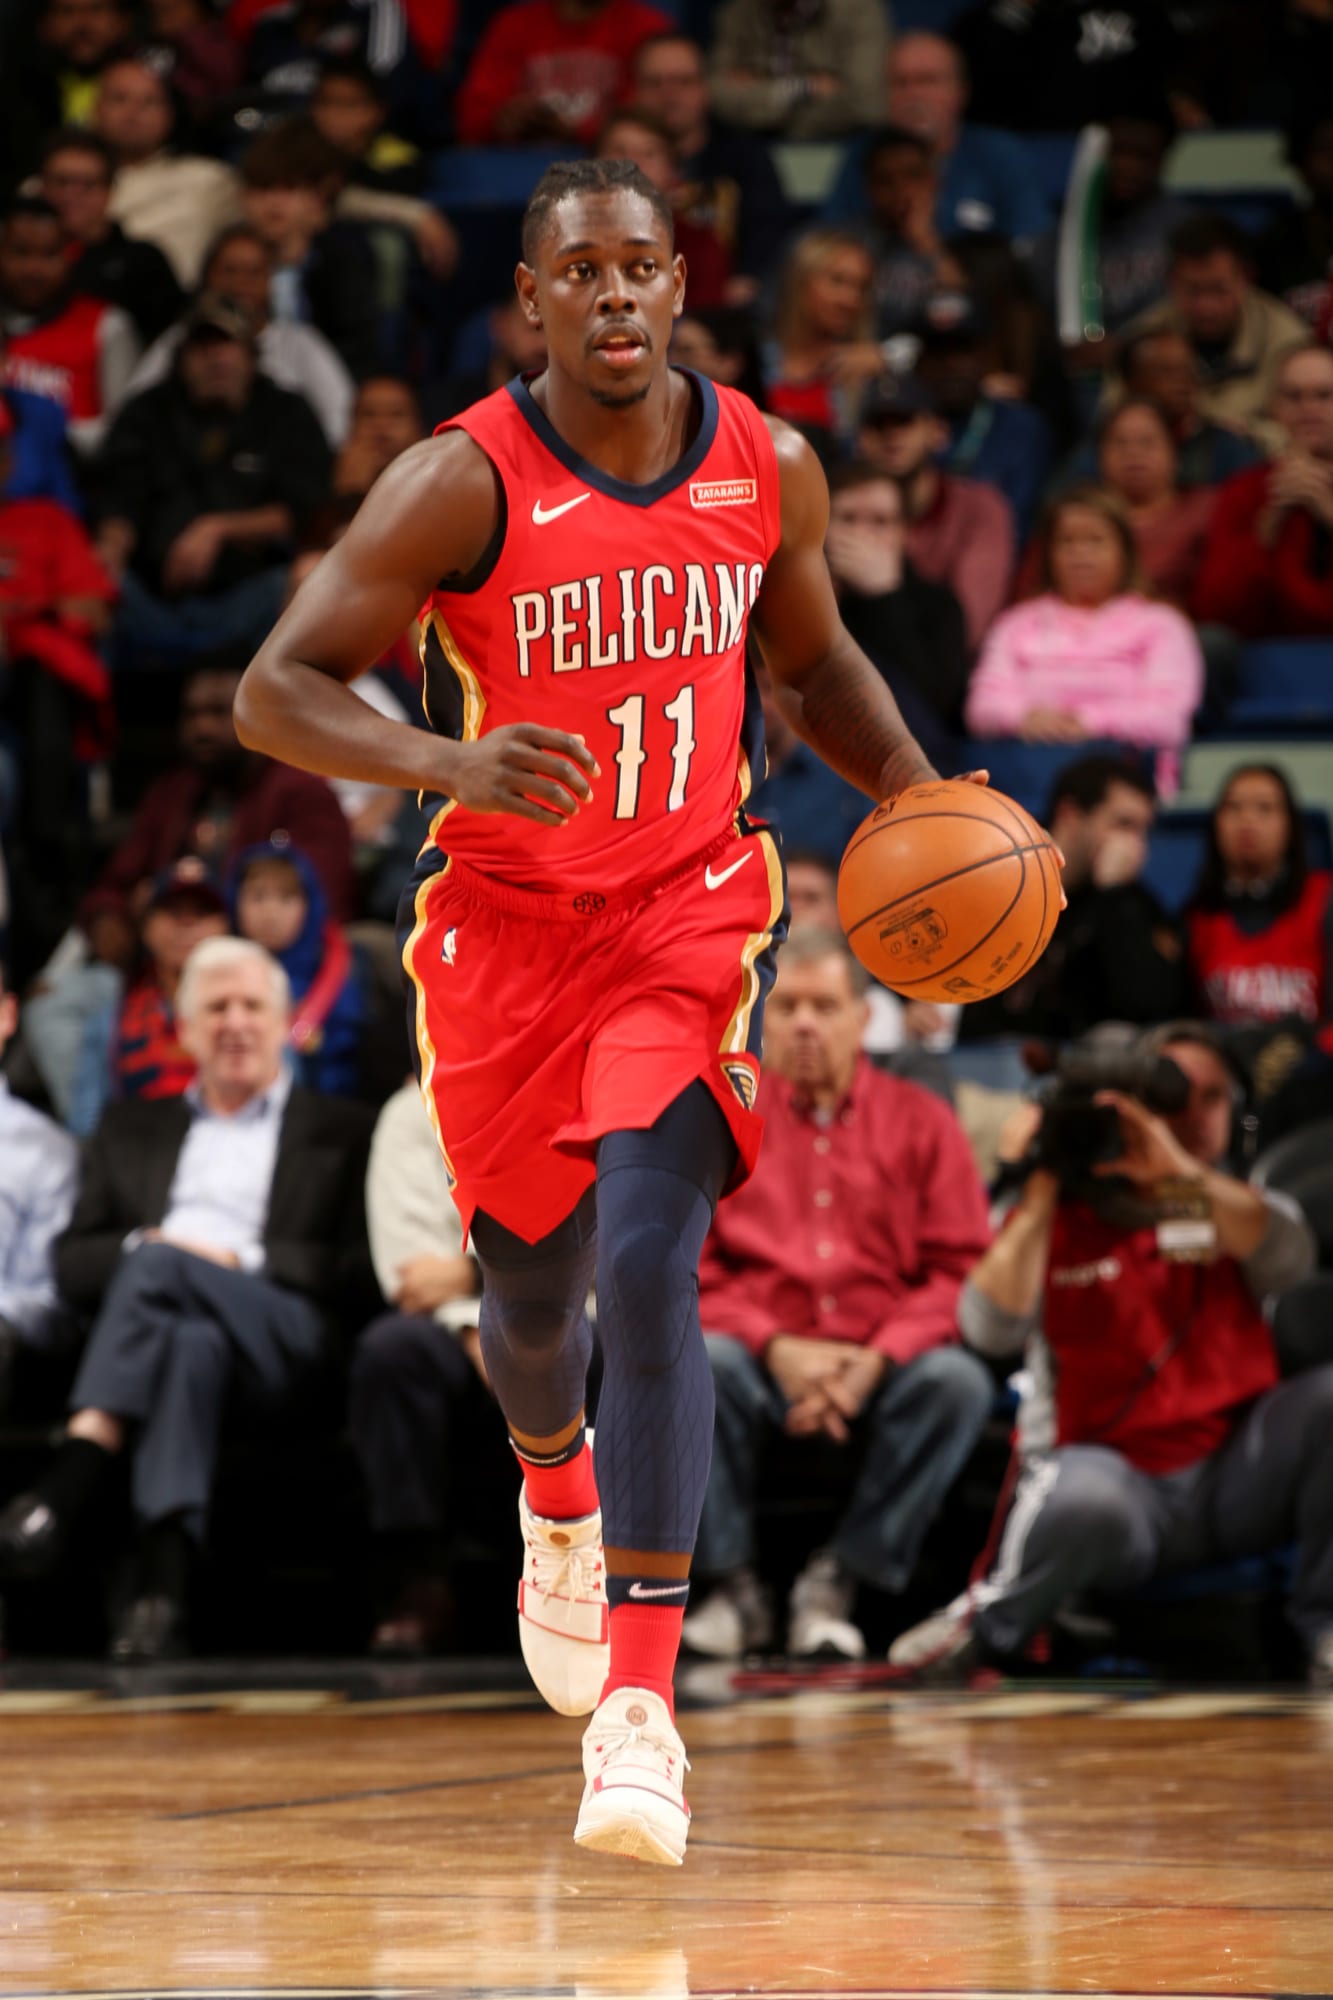 New Orleans Pelicans Player of the Week: Jrue Holiday